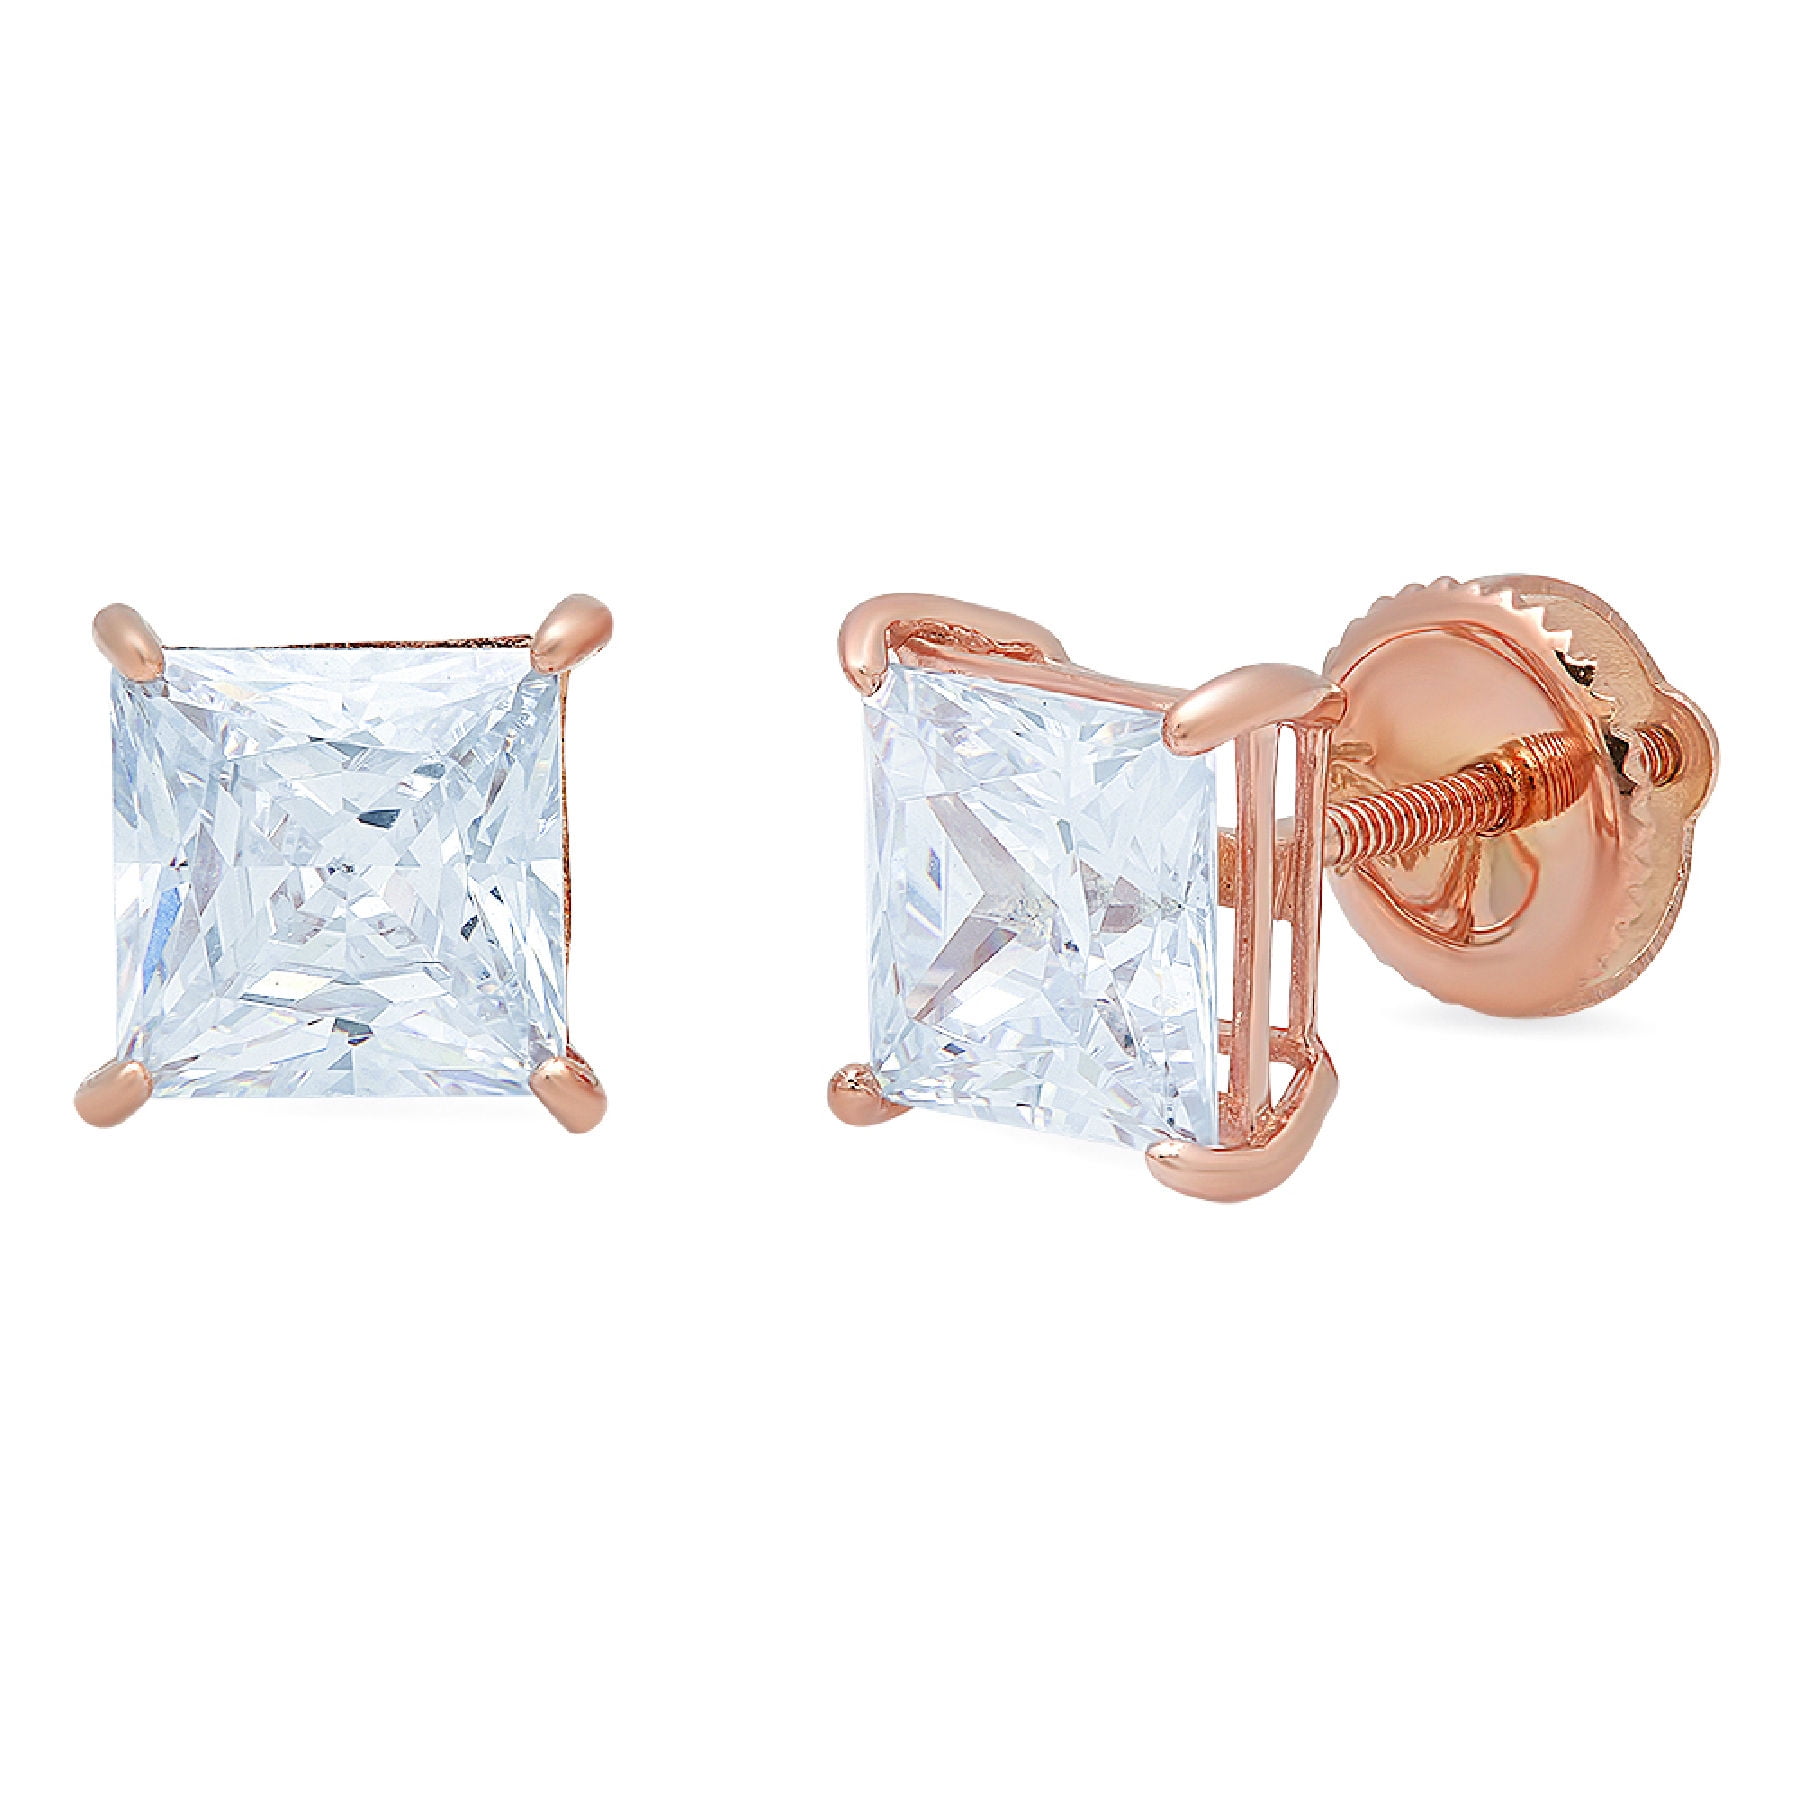 0.5 ct Brilliant Princess Cut Genuine Solitaire Studs Natural Swiss Blue Topaz Gemstone Real Solid 18K 14K  Rose Gold Earrings Push back